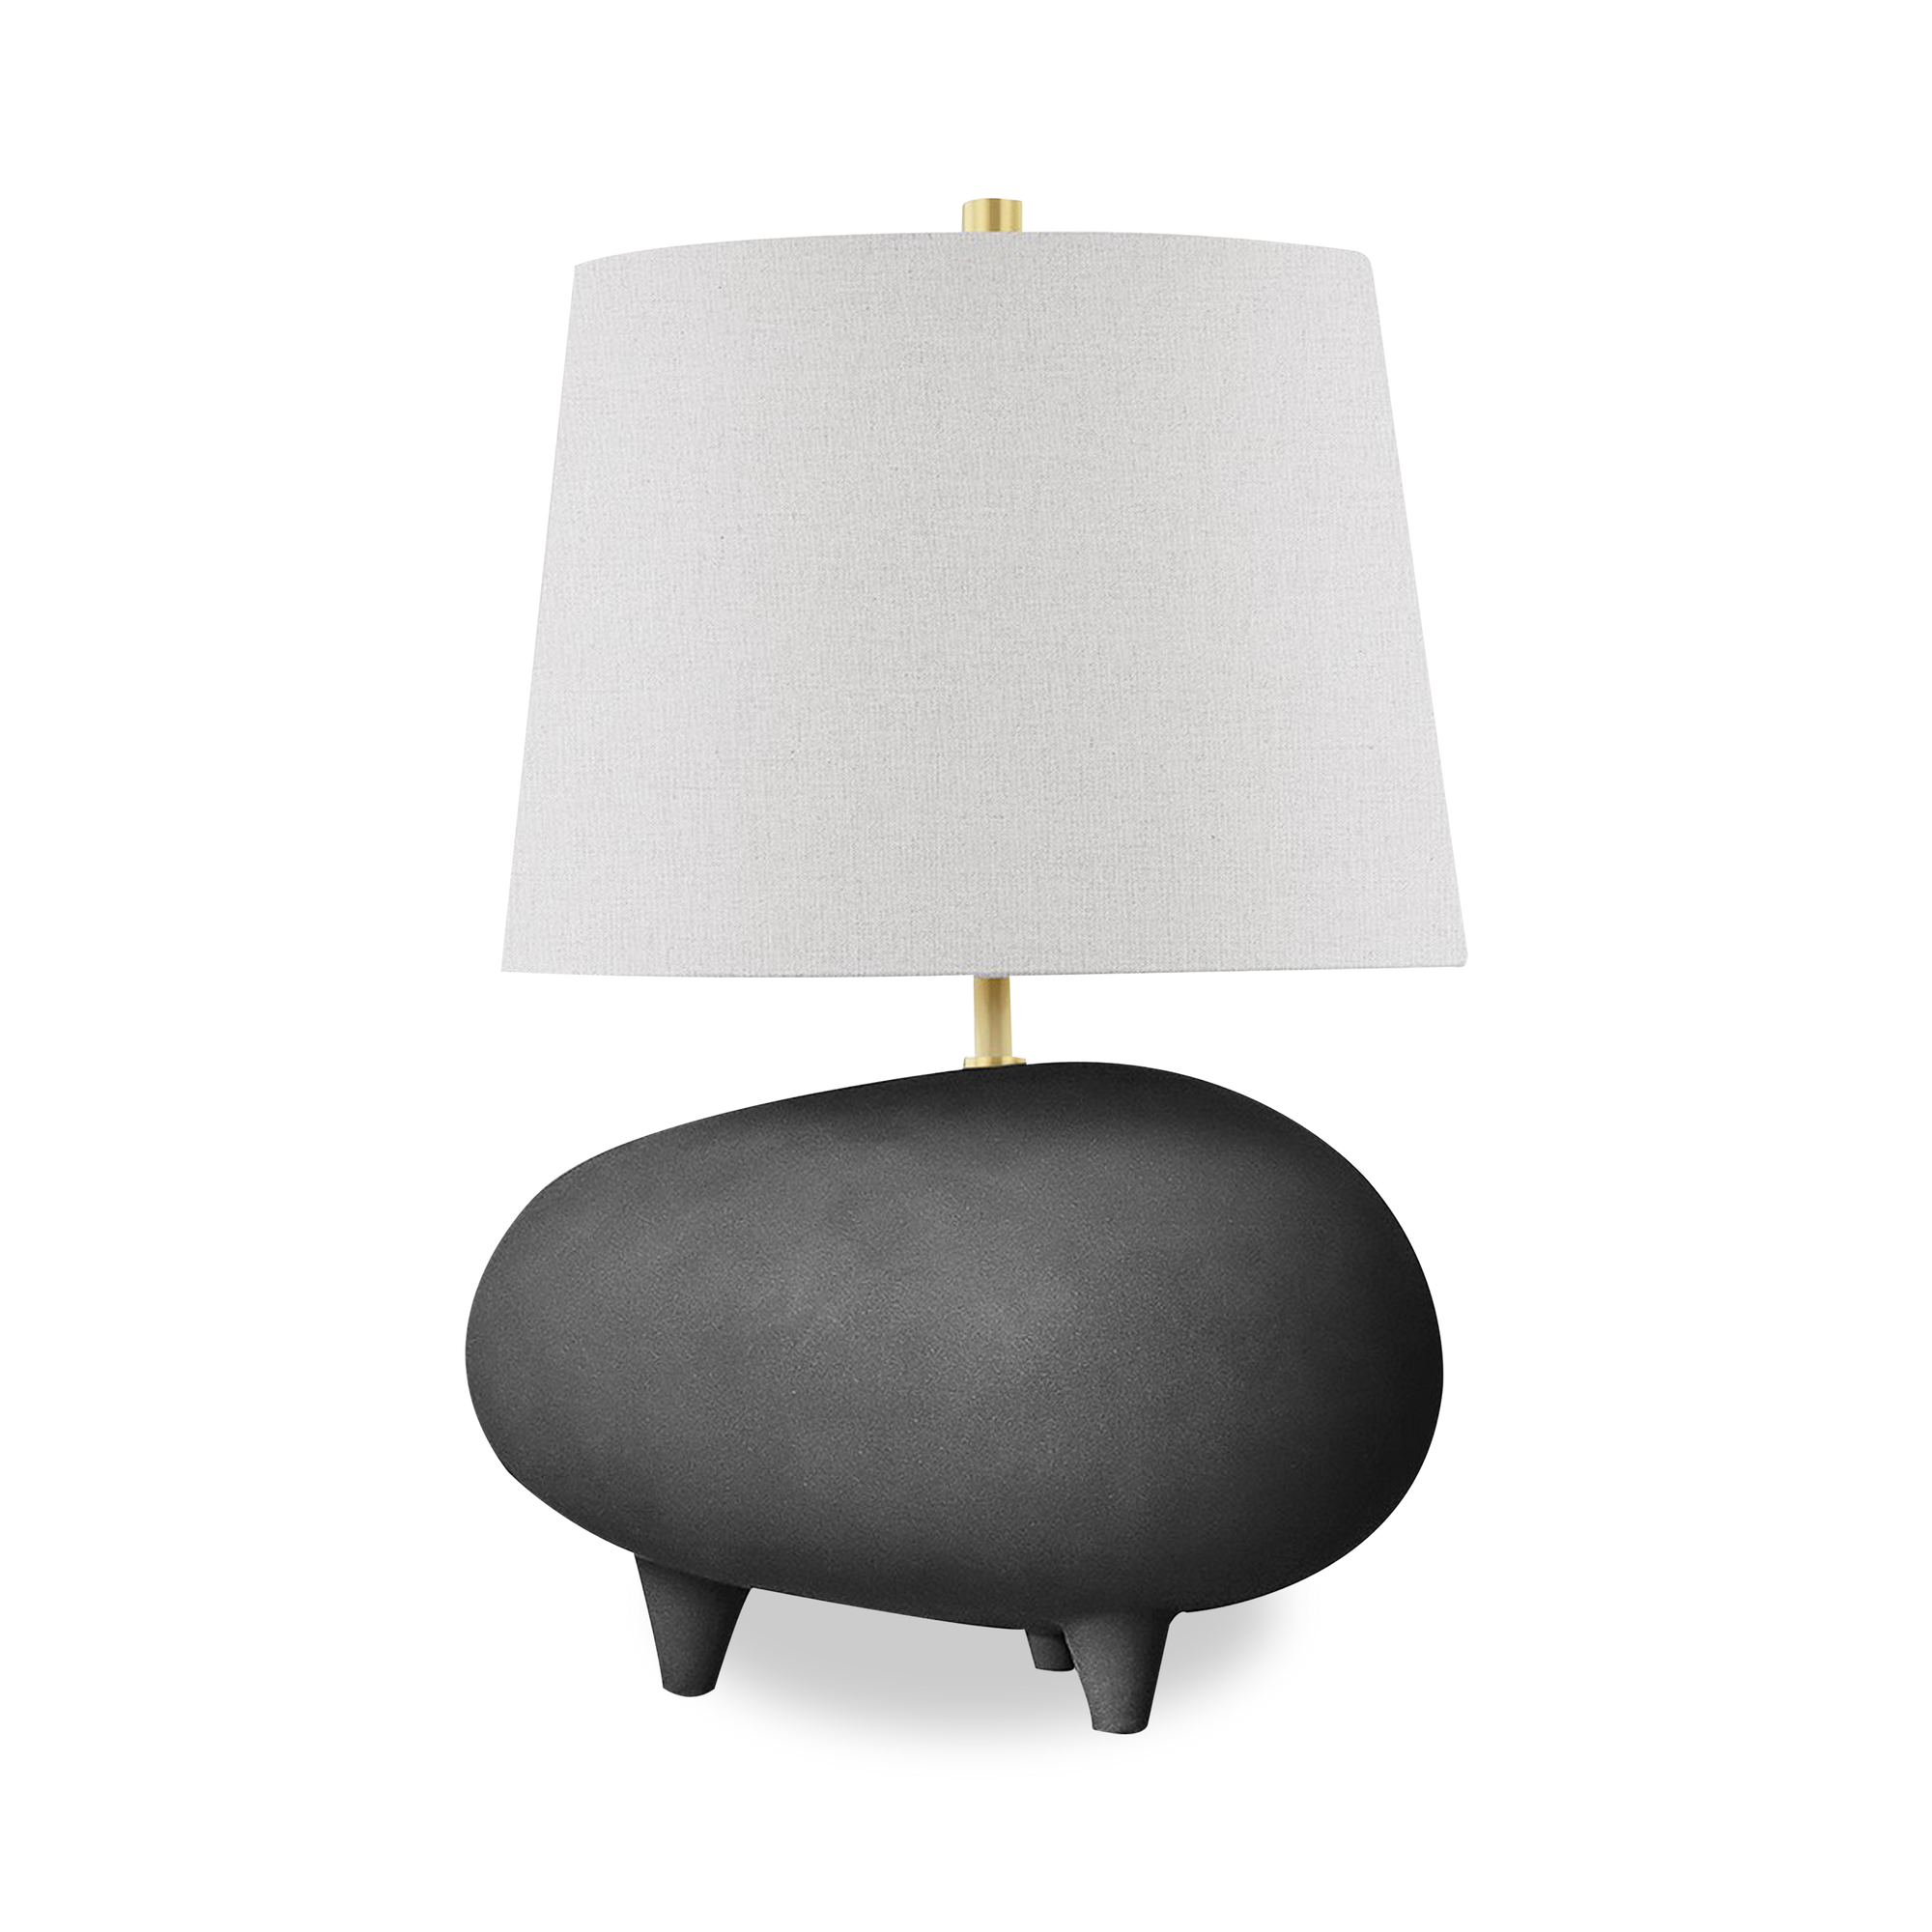 Drawing on the spirit of French sculptors of the ‘40s, Tiptoe is a unique table lamp combining a smooth organic body of ceramic in matte finish, unusual and contemporary, with br